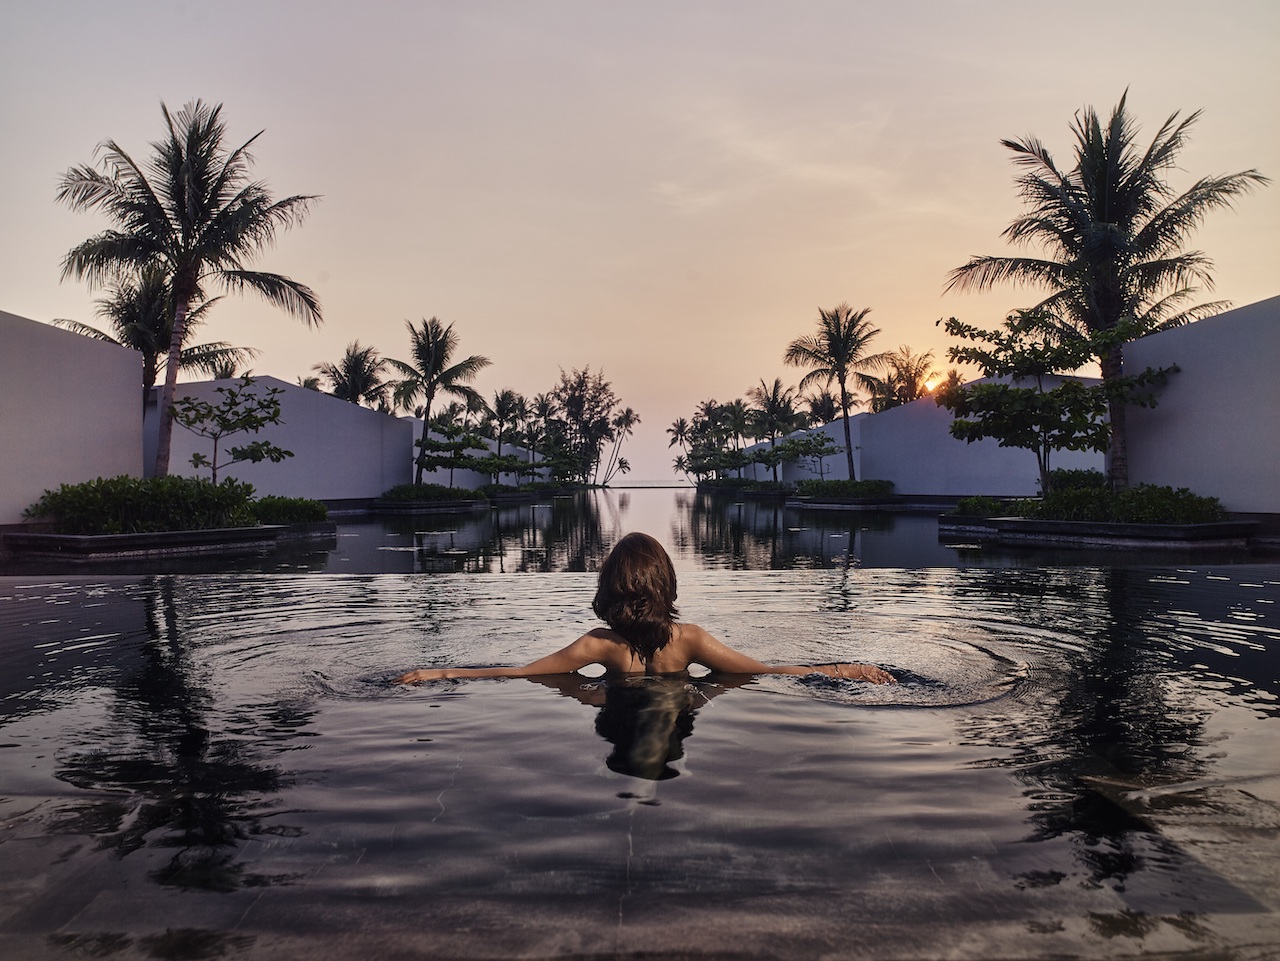 Regent Hotels are set to shake up the hospitality scene on one of Vietnam's favorite island destinations with the opening of Regent Phu Quoc this year. 